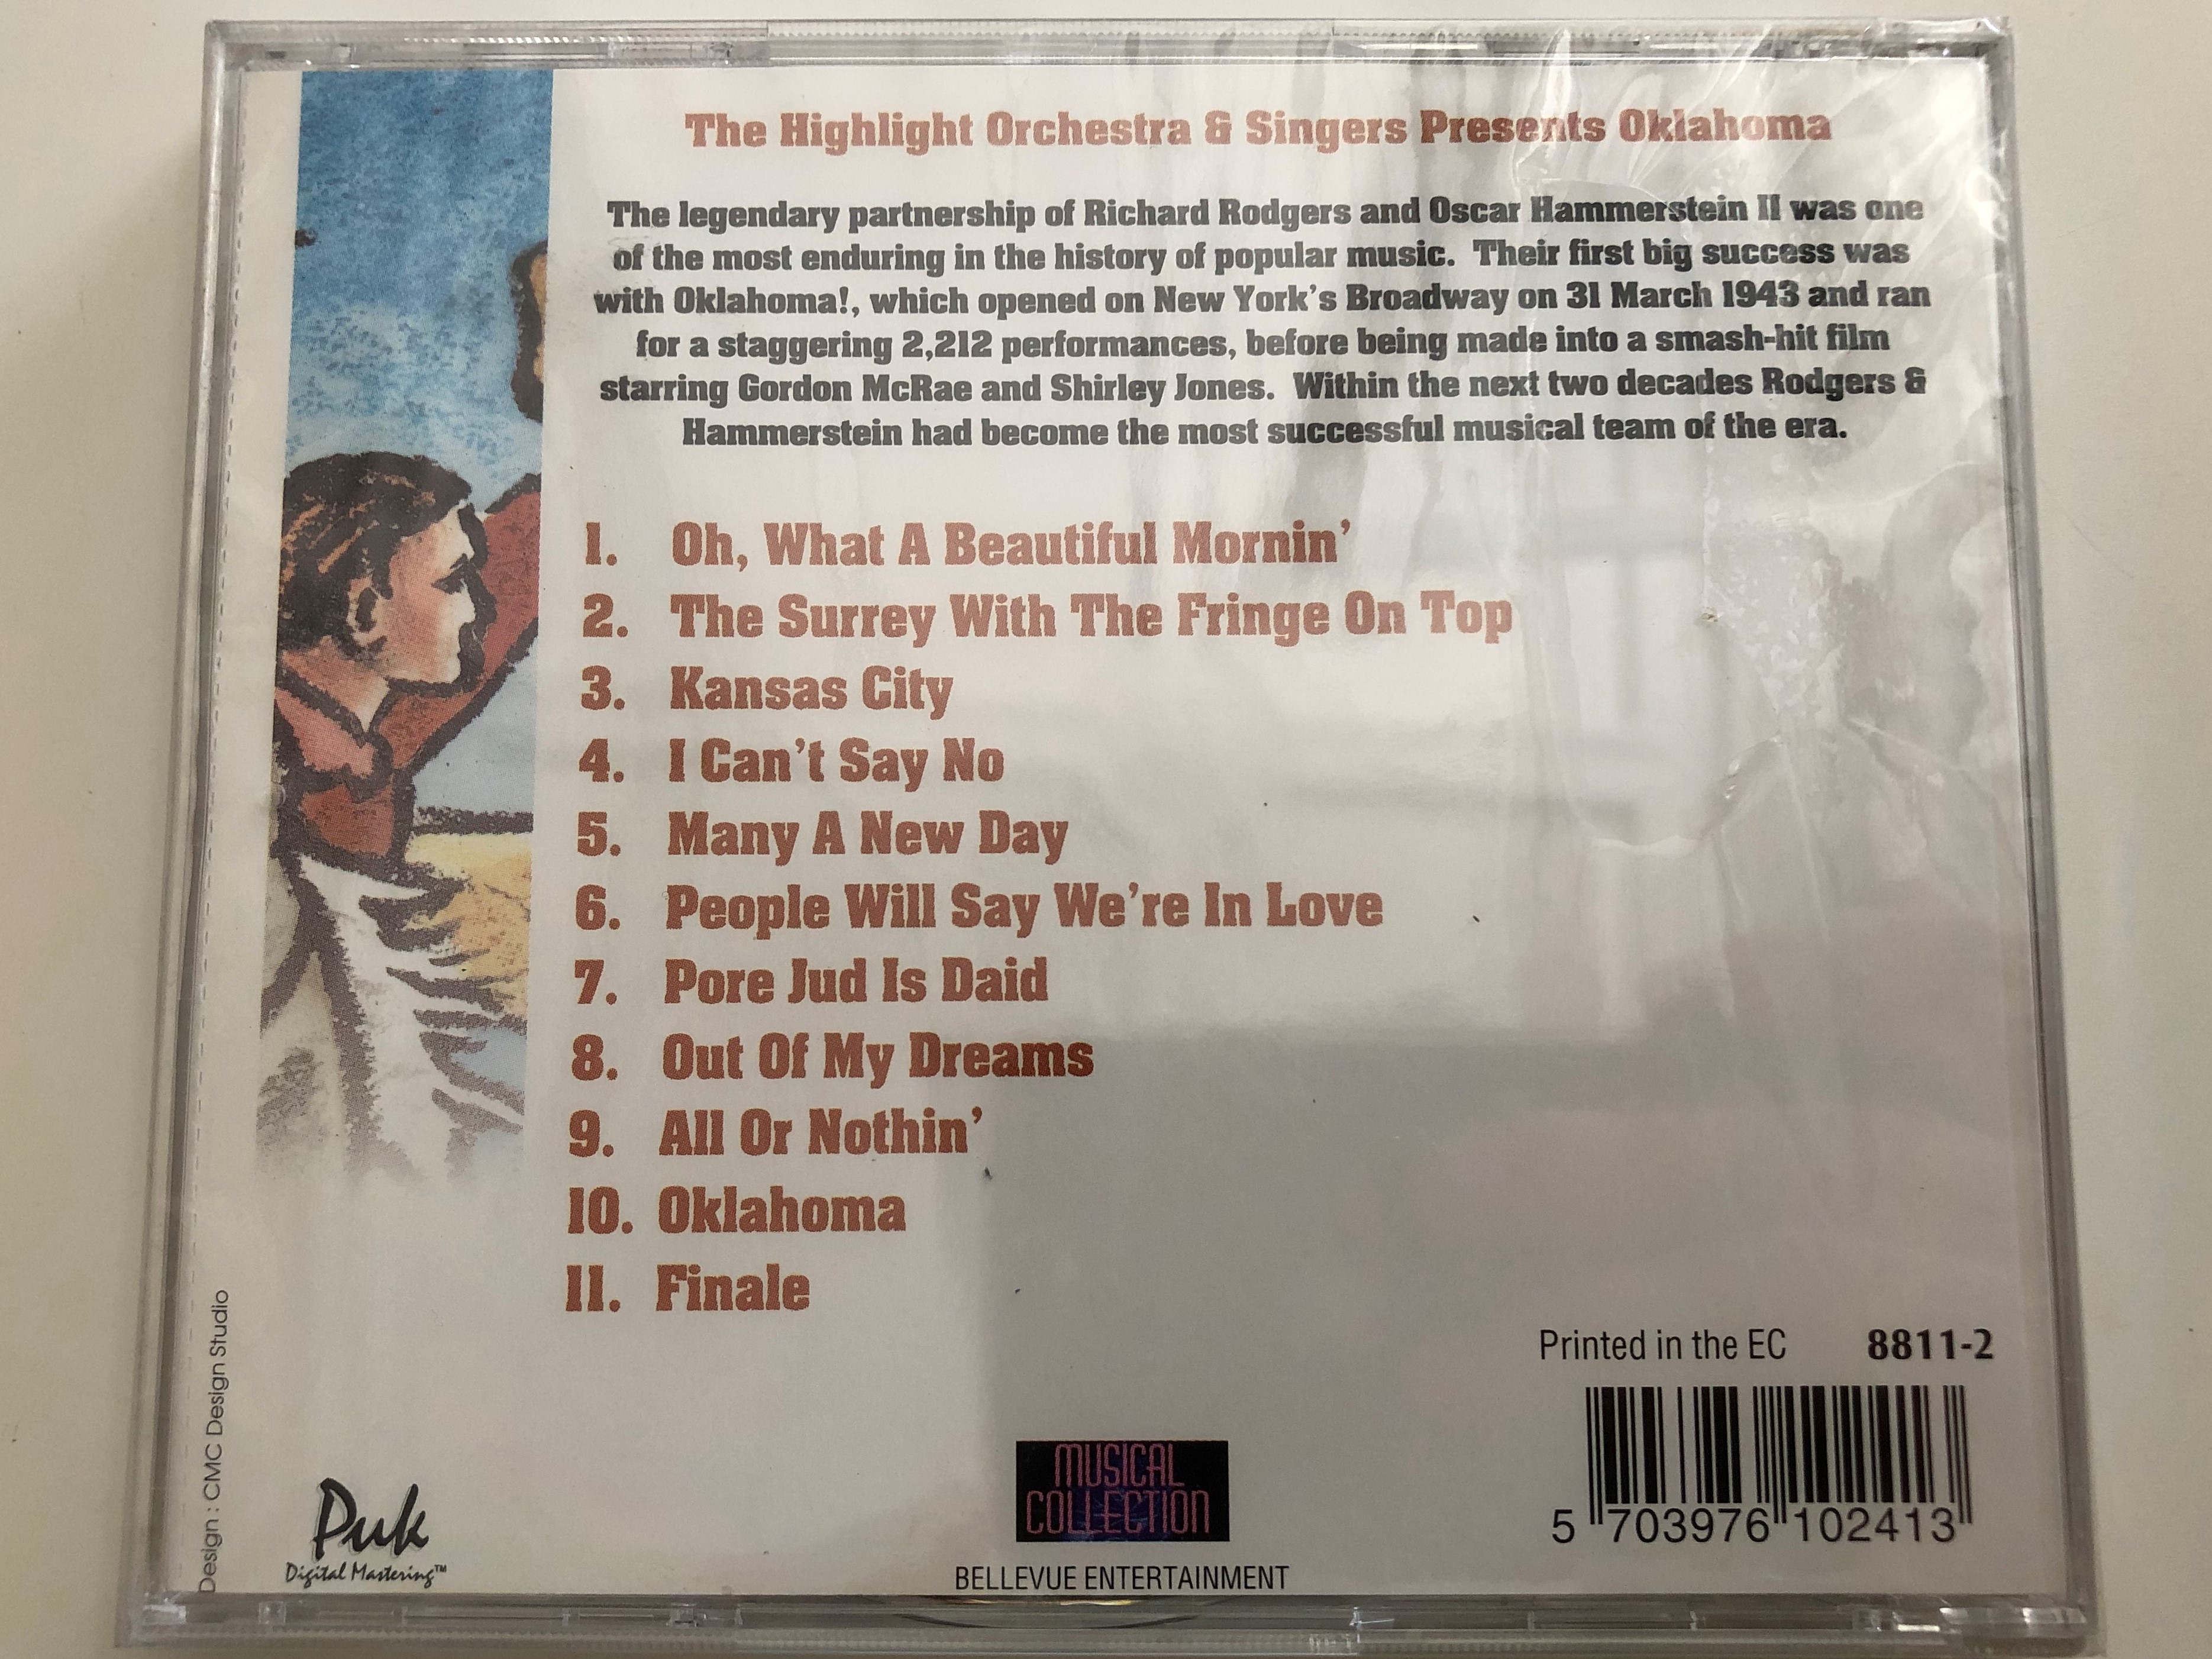 oklahoma-includes-oh-what-a-beautiful-morning-the-surrey-with-the-fridge-on-top-i-can-t-no-people-will-say-we-re-in-love-out-of-my-dreams-oklahoma-musical-collection-audio-cd-8811-2-2-.jpg